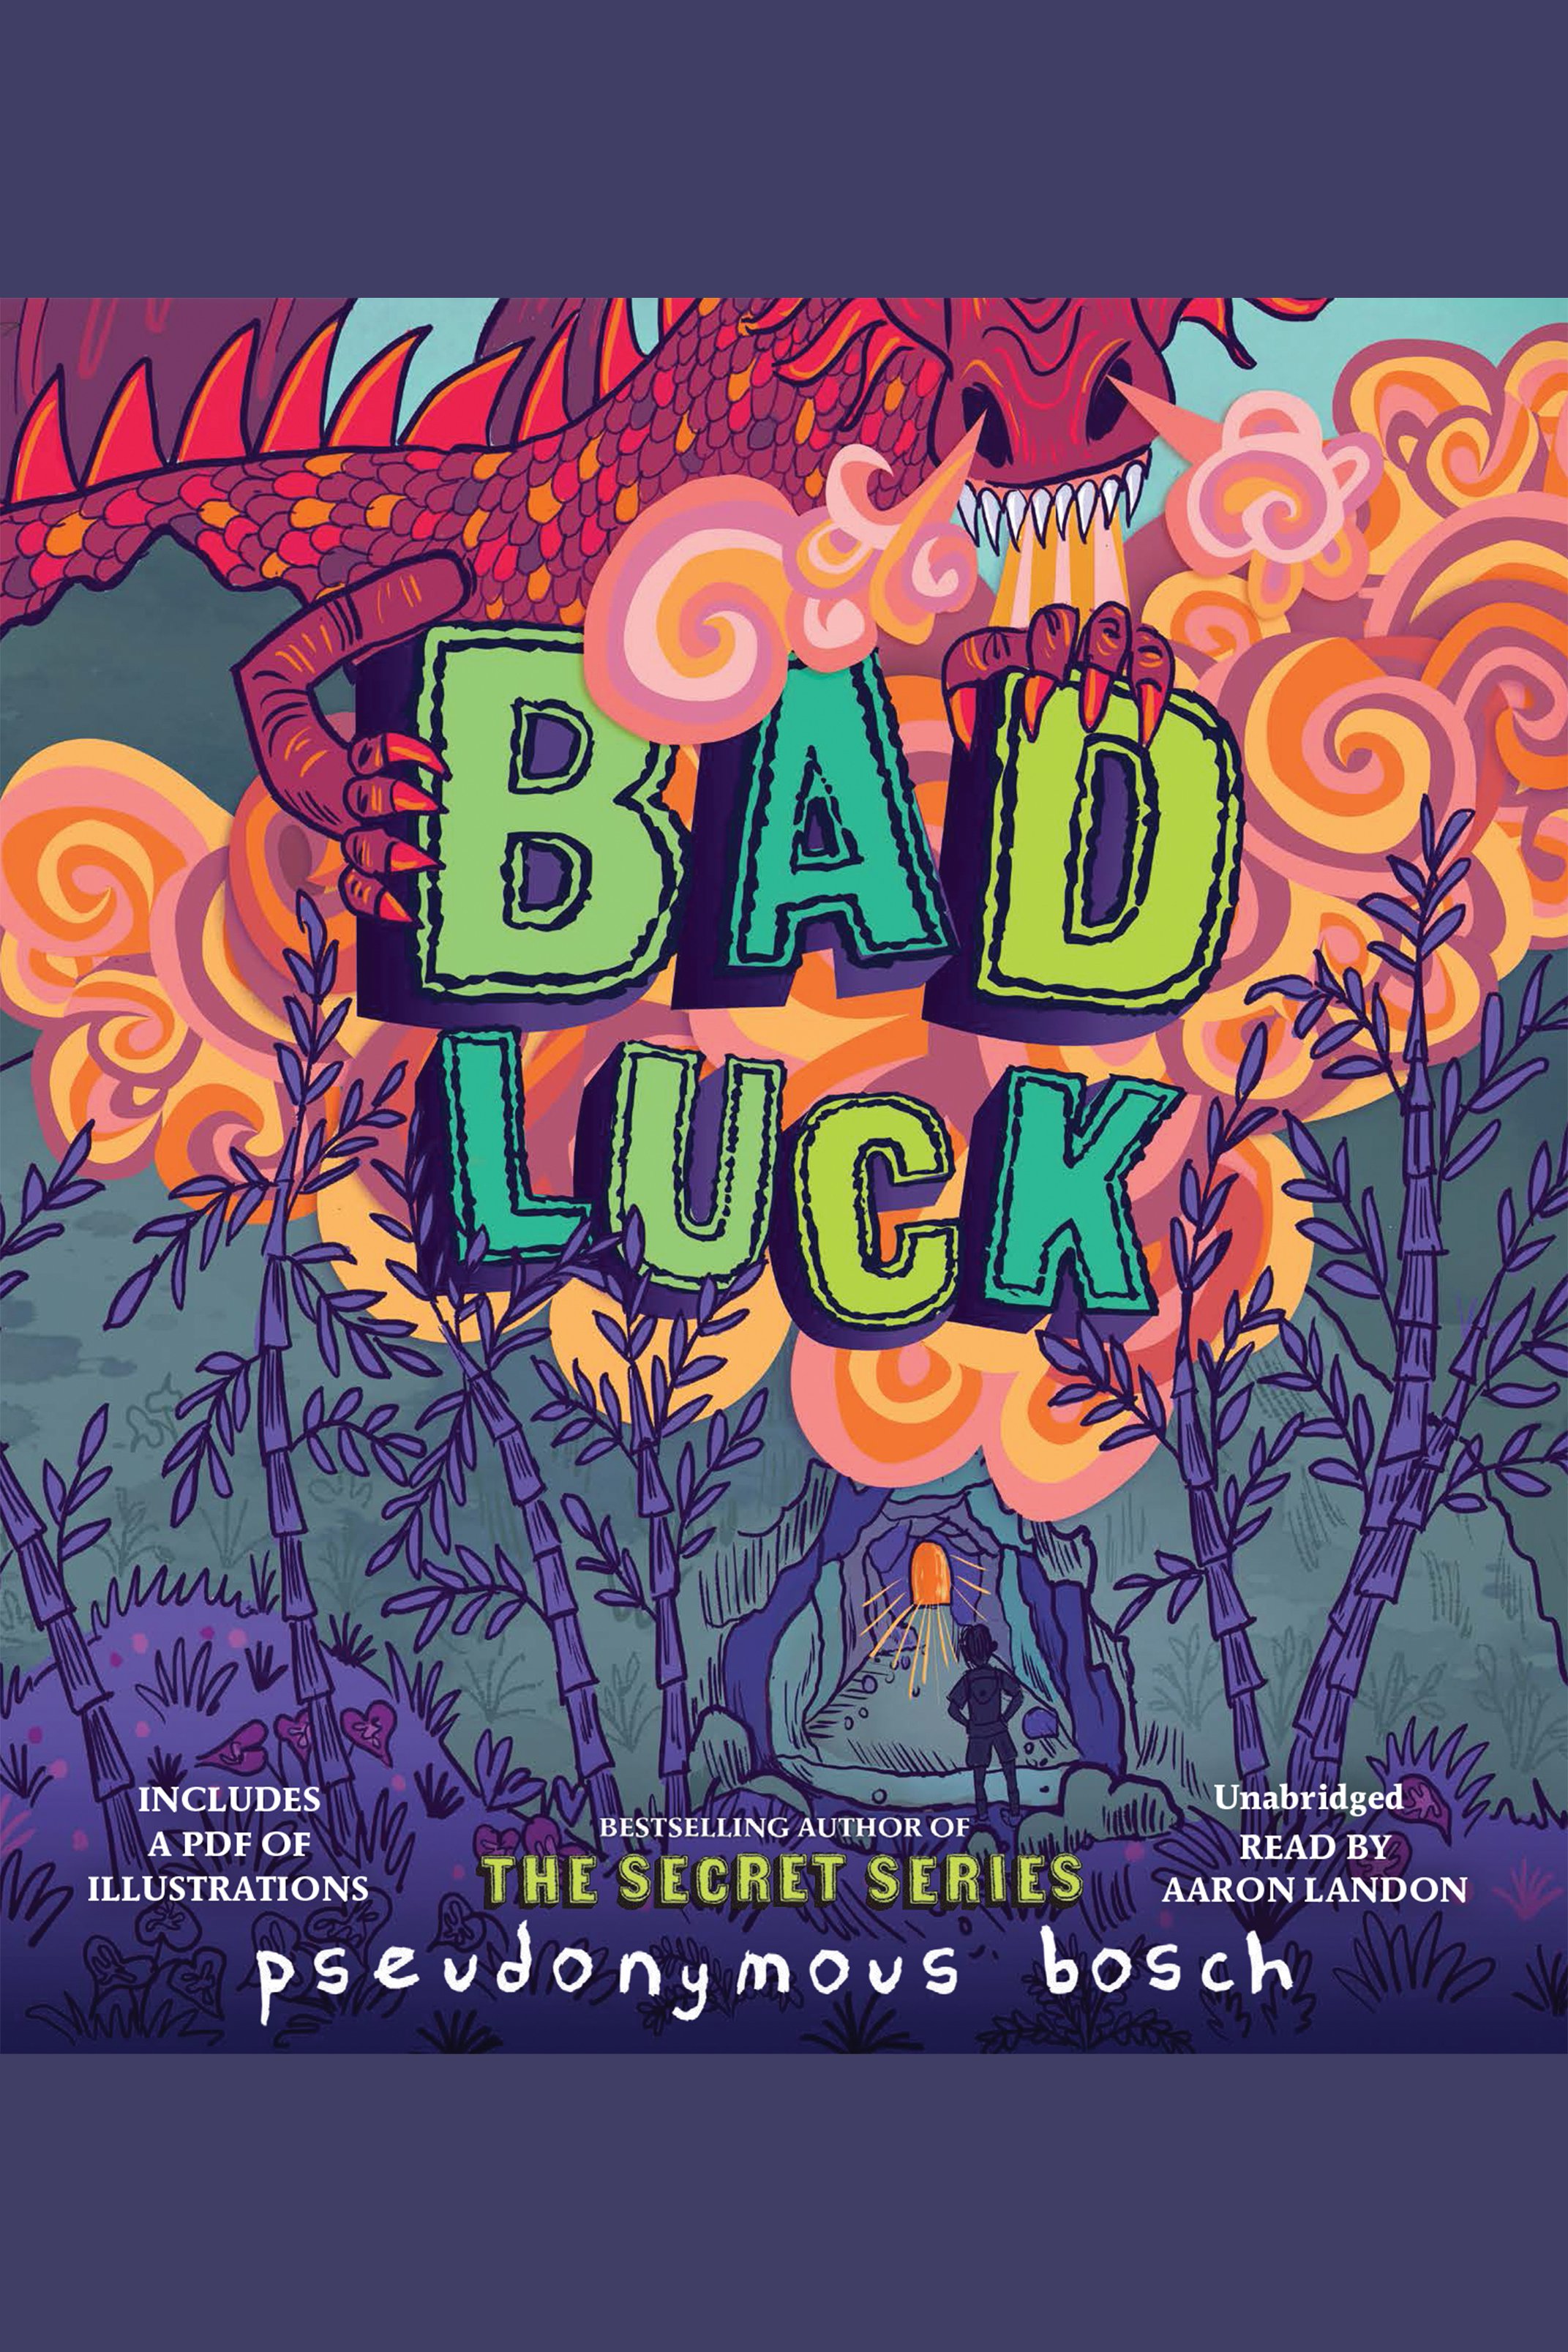 Bad luck cover image